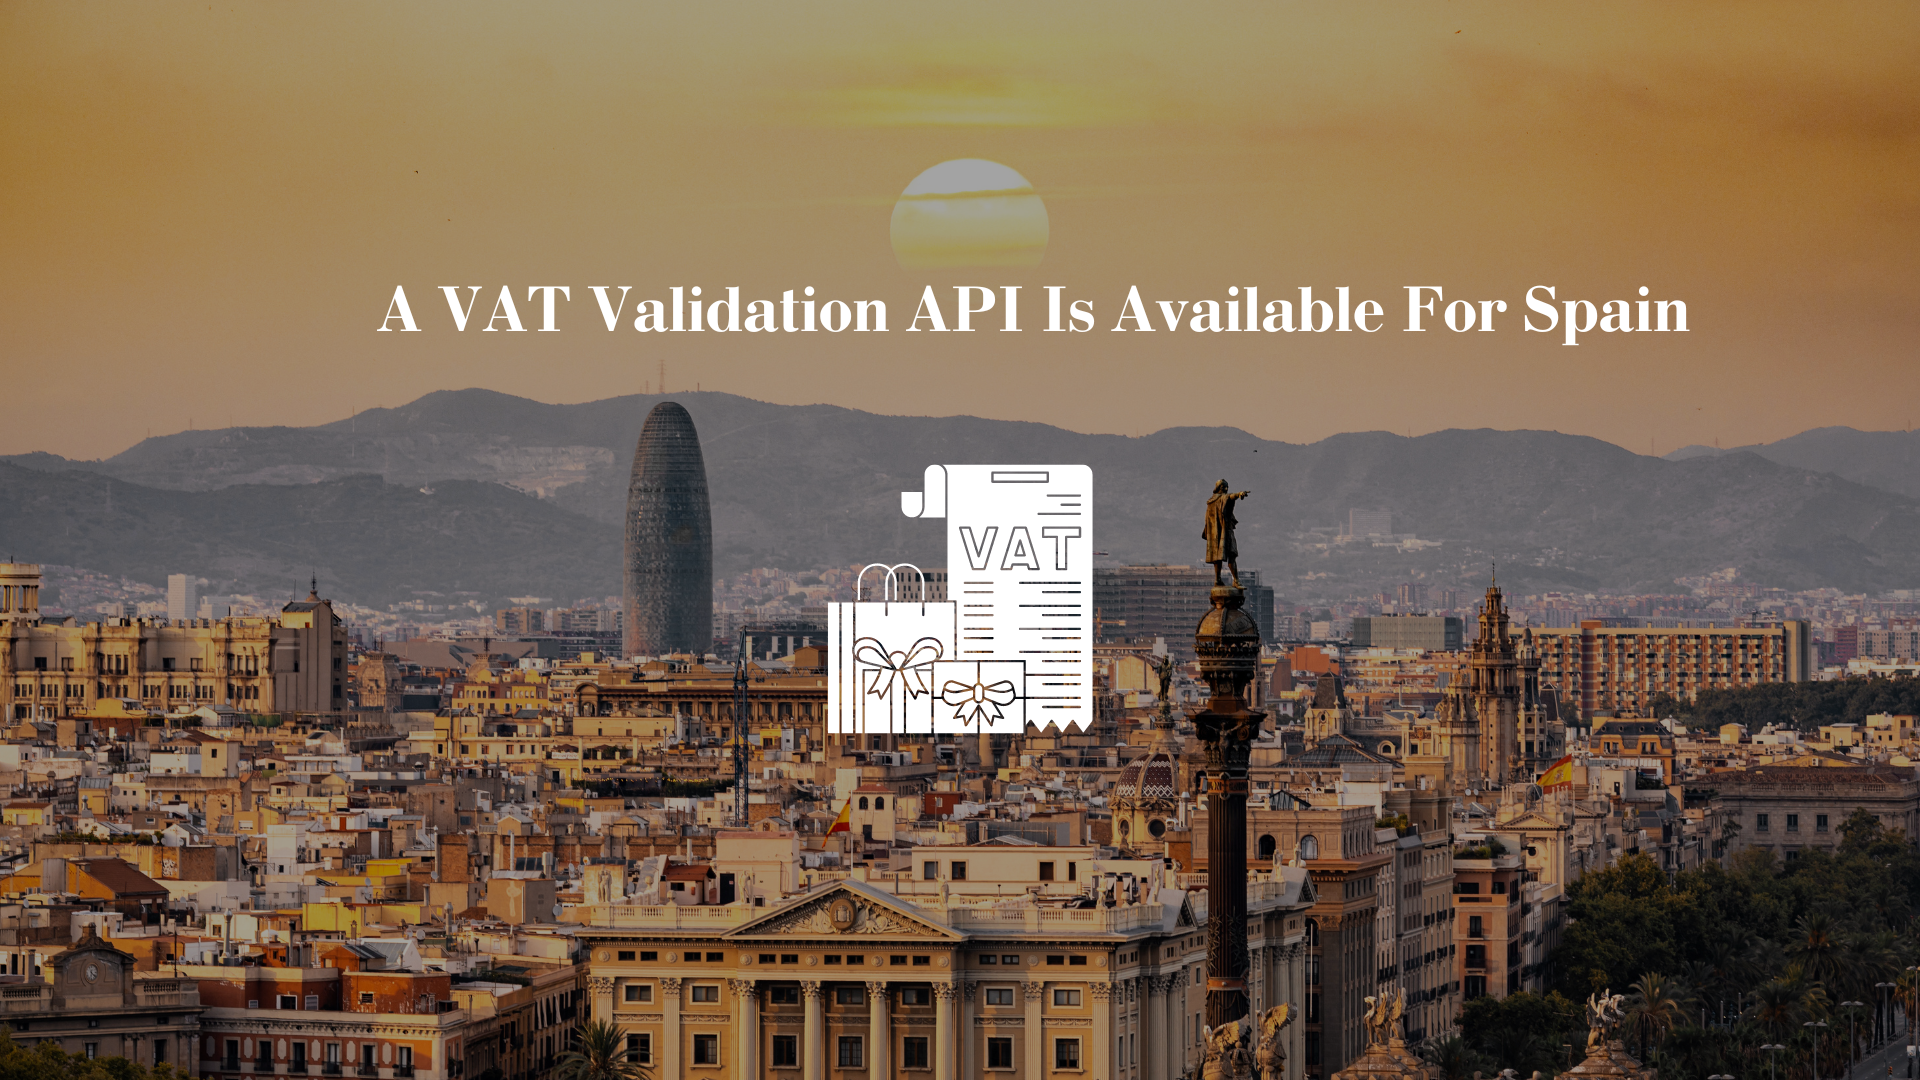 A VAT Validation API Is Available For Spain